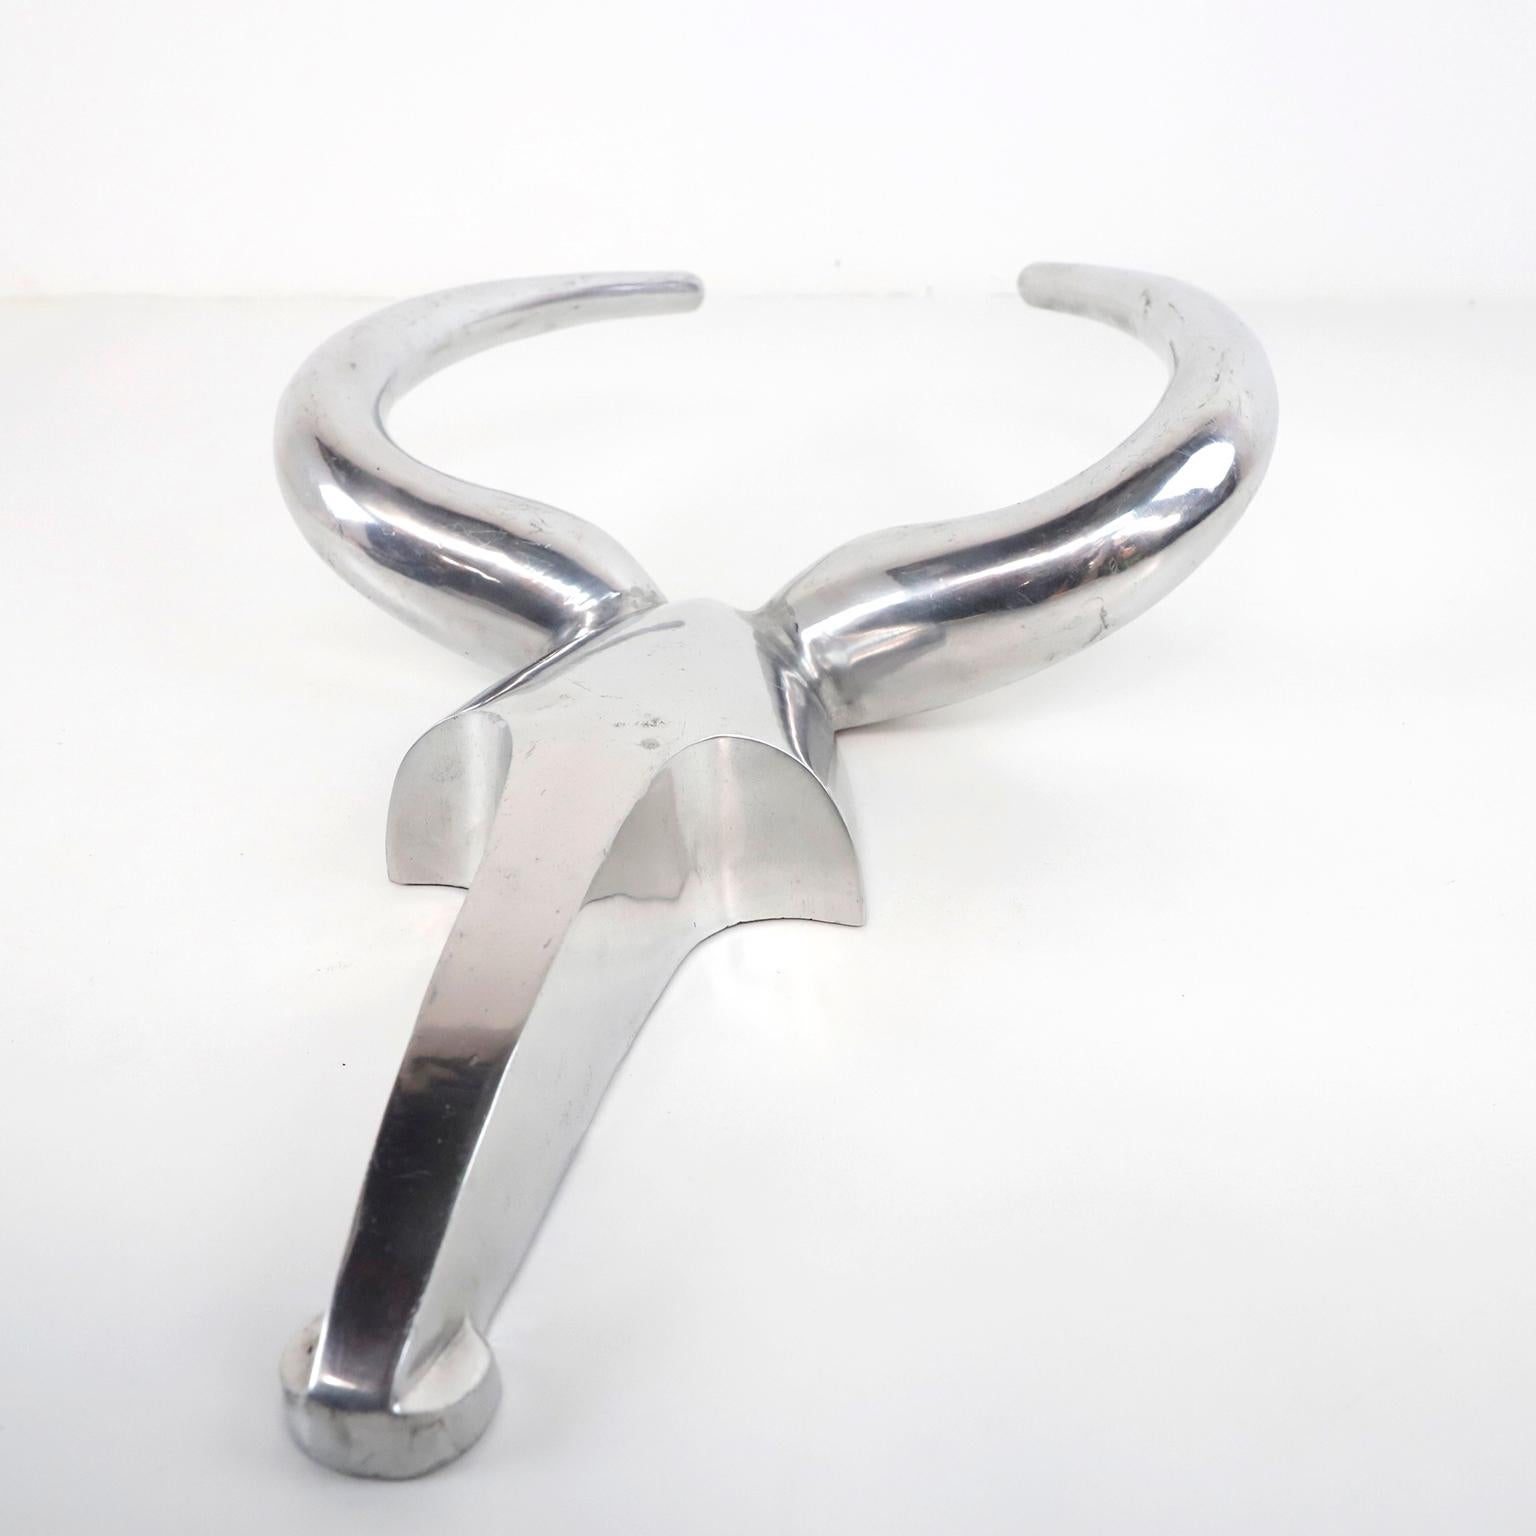 We offer this Bull Head made in solid aluminium with abstract shapes and ready for hang in your wall.